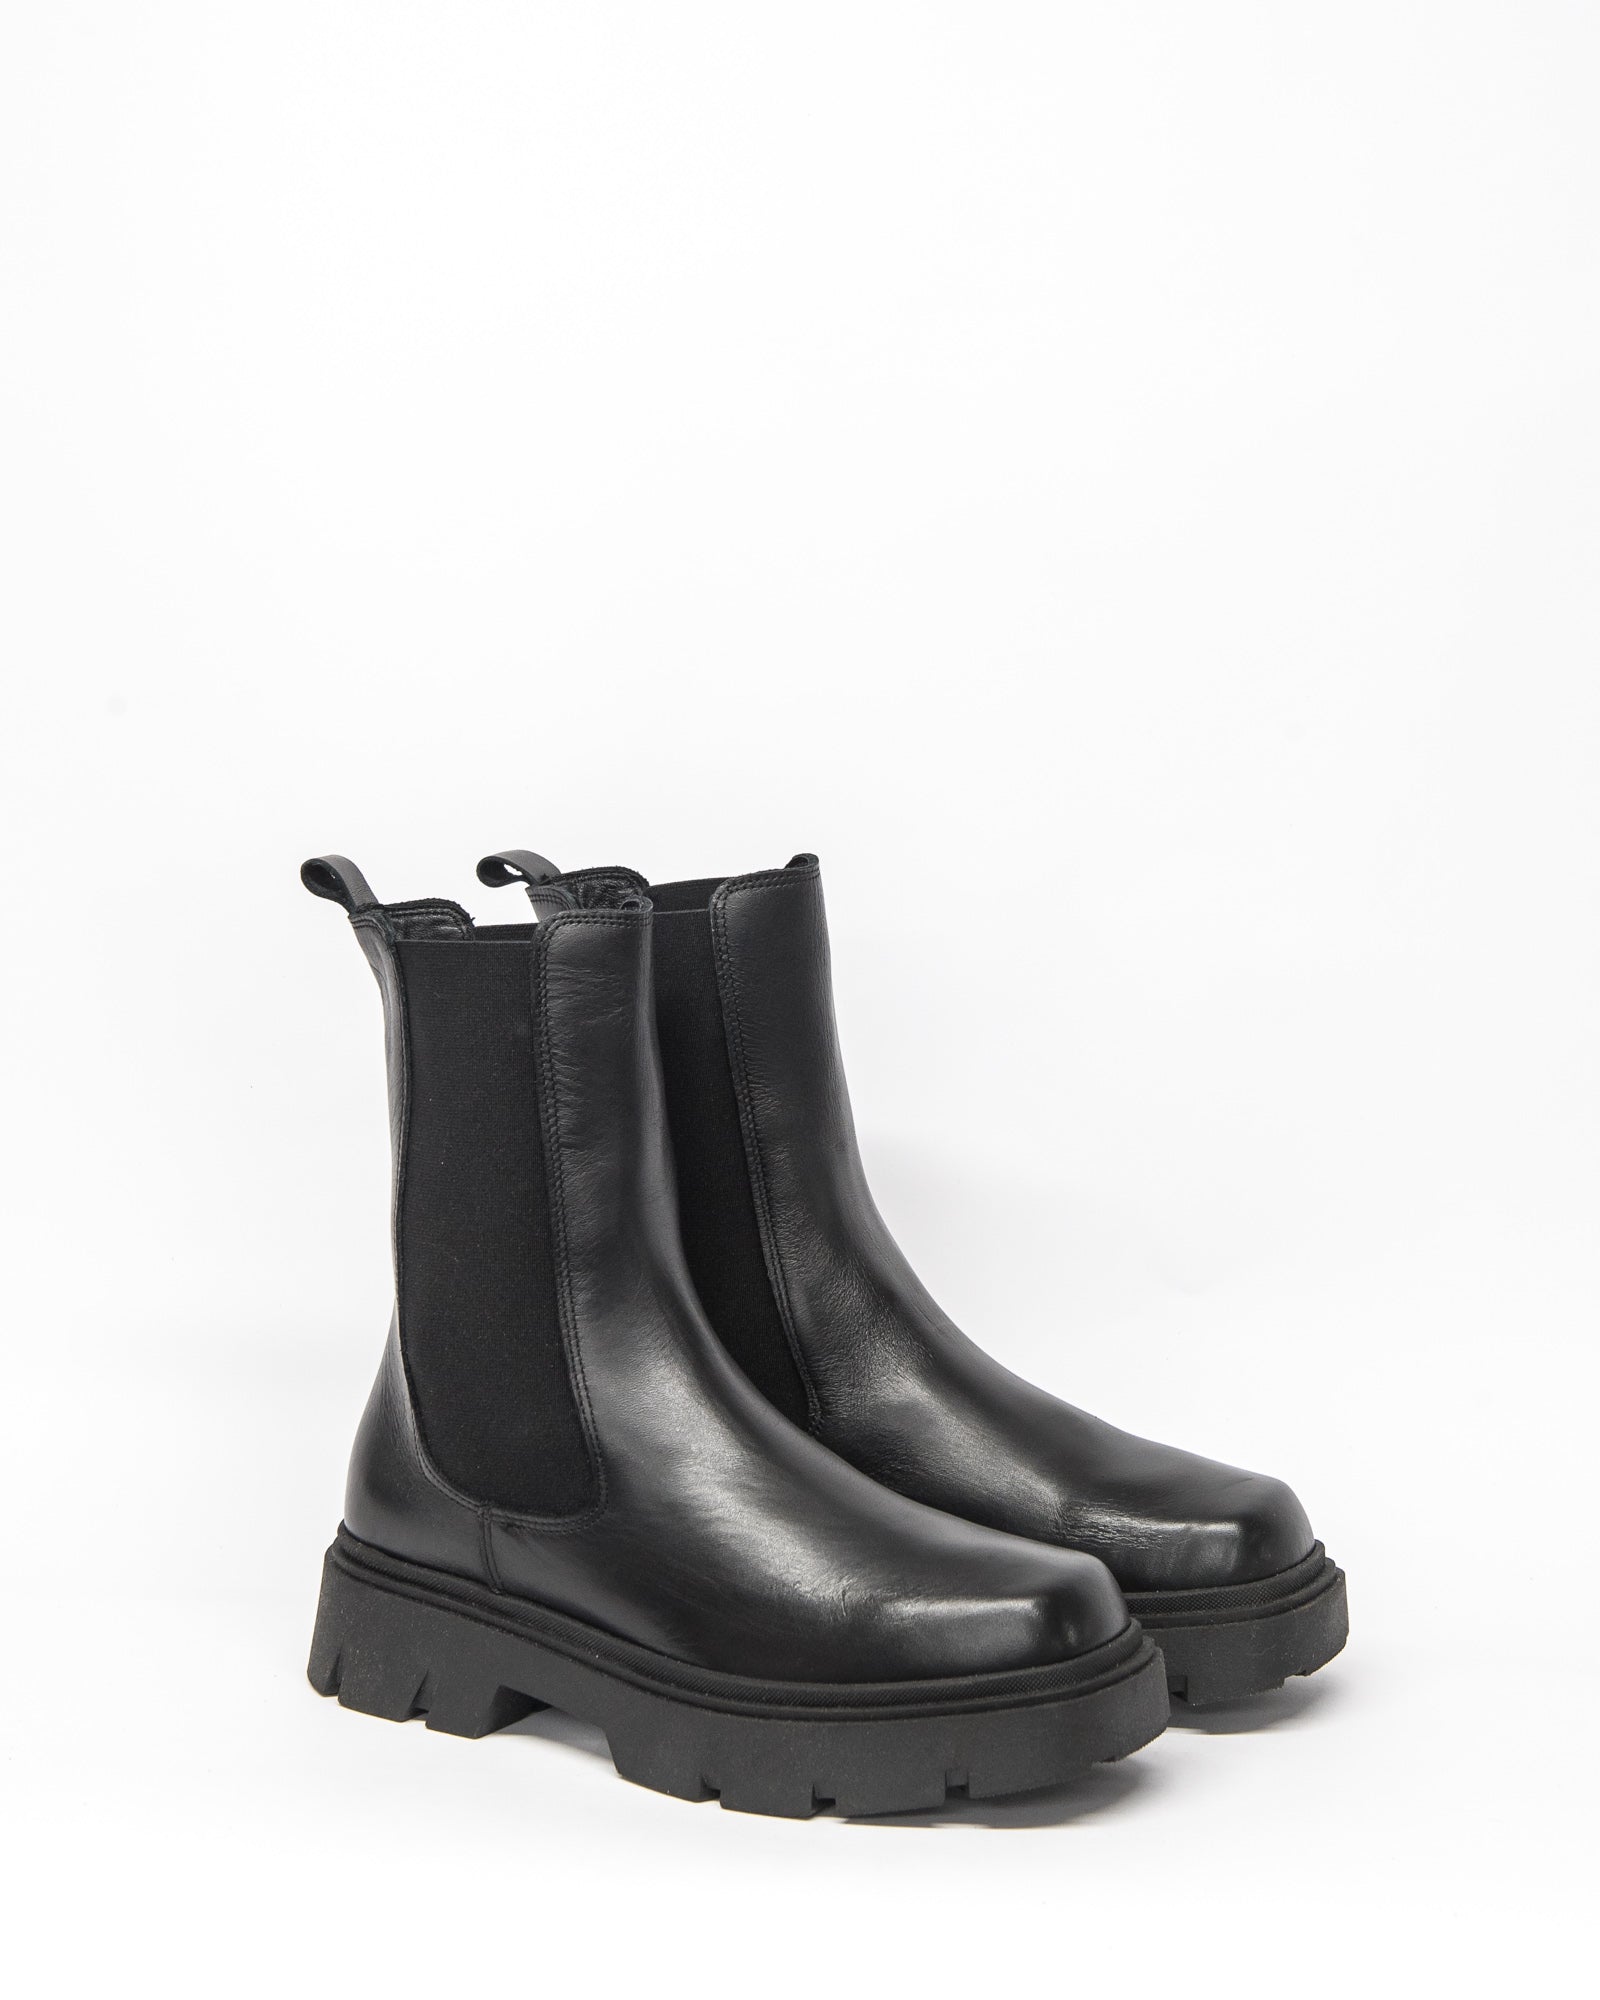 empire boot - black leather